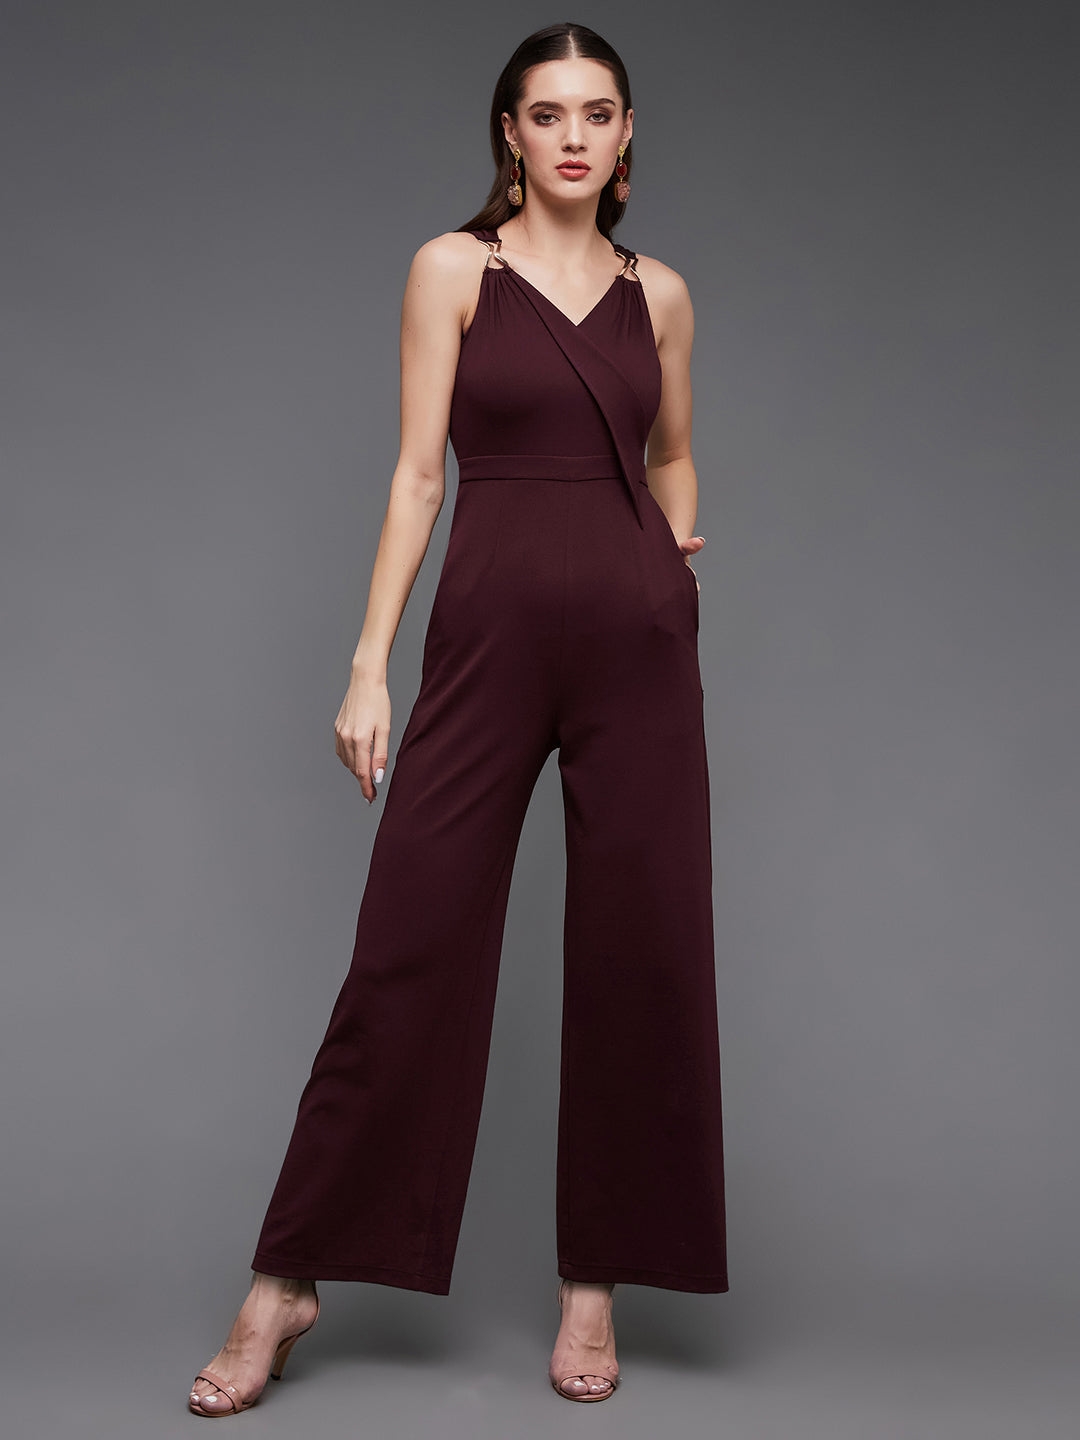 Women's White Polyester  Jumpsuits